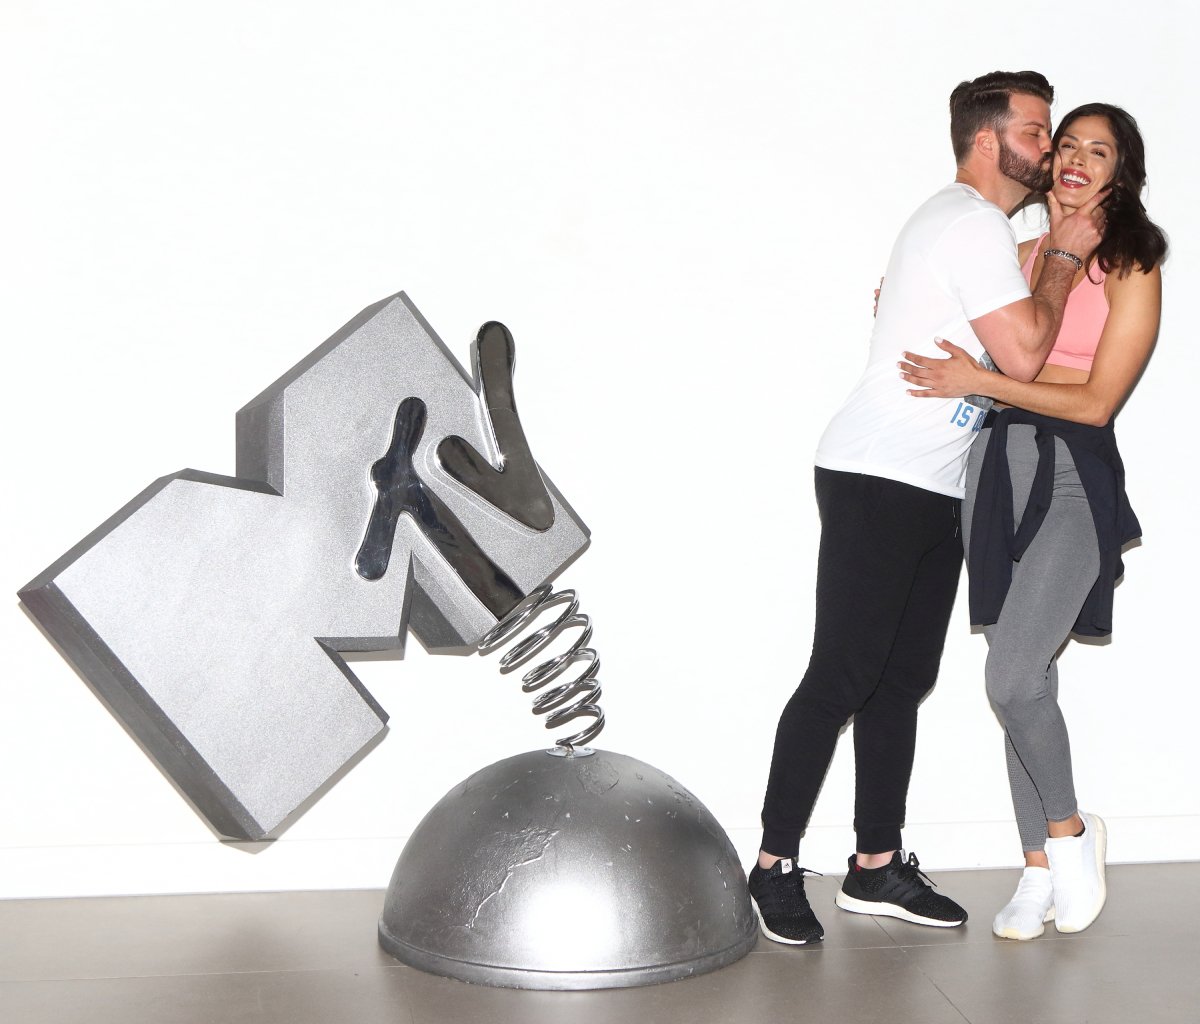 Johnny Bananas and Nany Gonzalez from MTV's brand new series, The Challenge: War Of The Worlds attend press launch at MTV HQ, Hawley Crescent, Camden